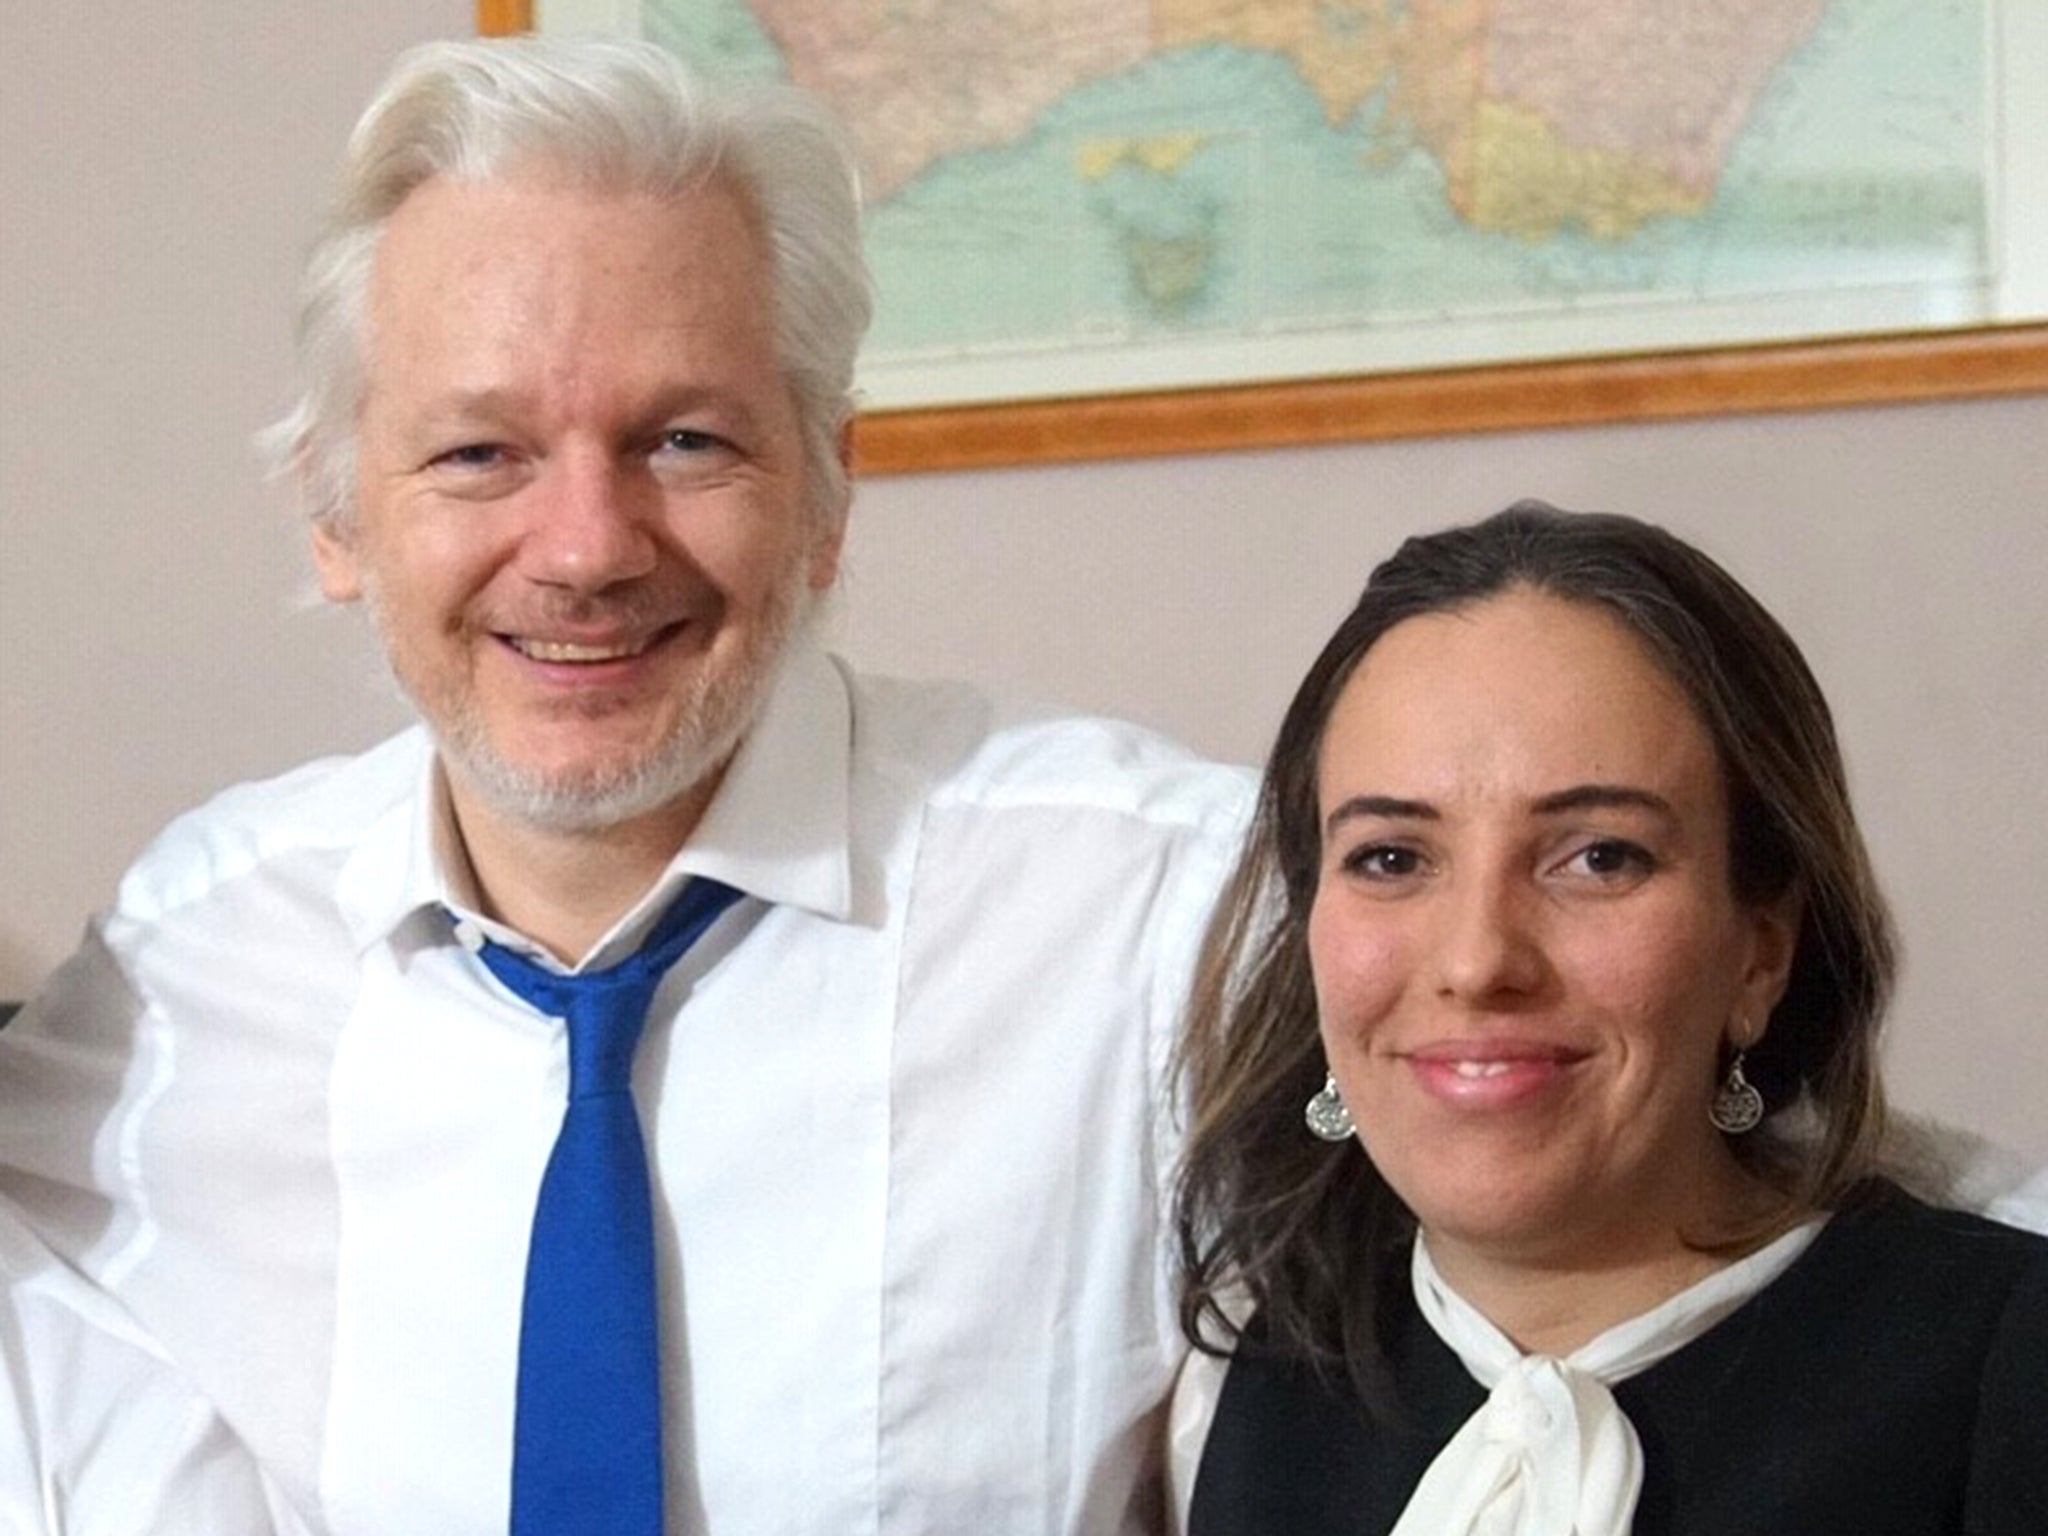 Stella Assange has previously said her husband is ‘certain’ to die in US custody if extradited as his health is deteriorating